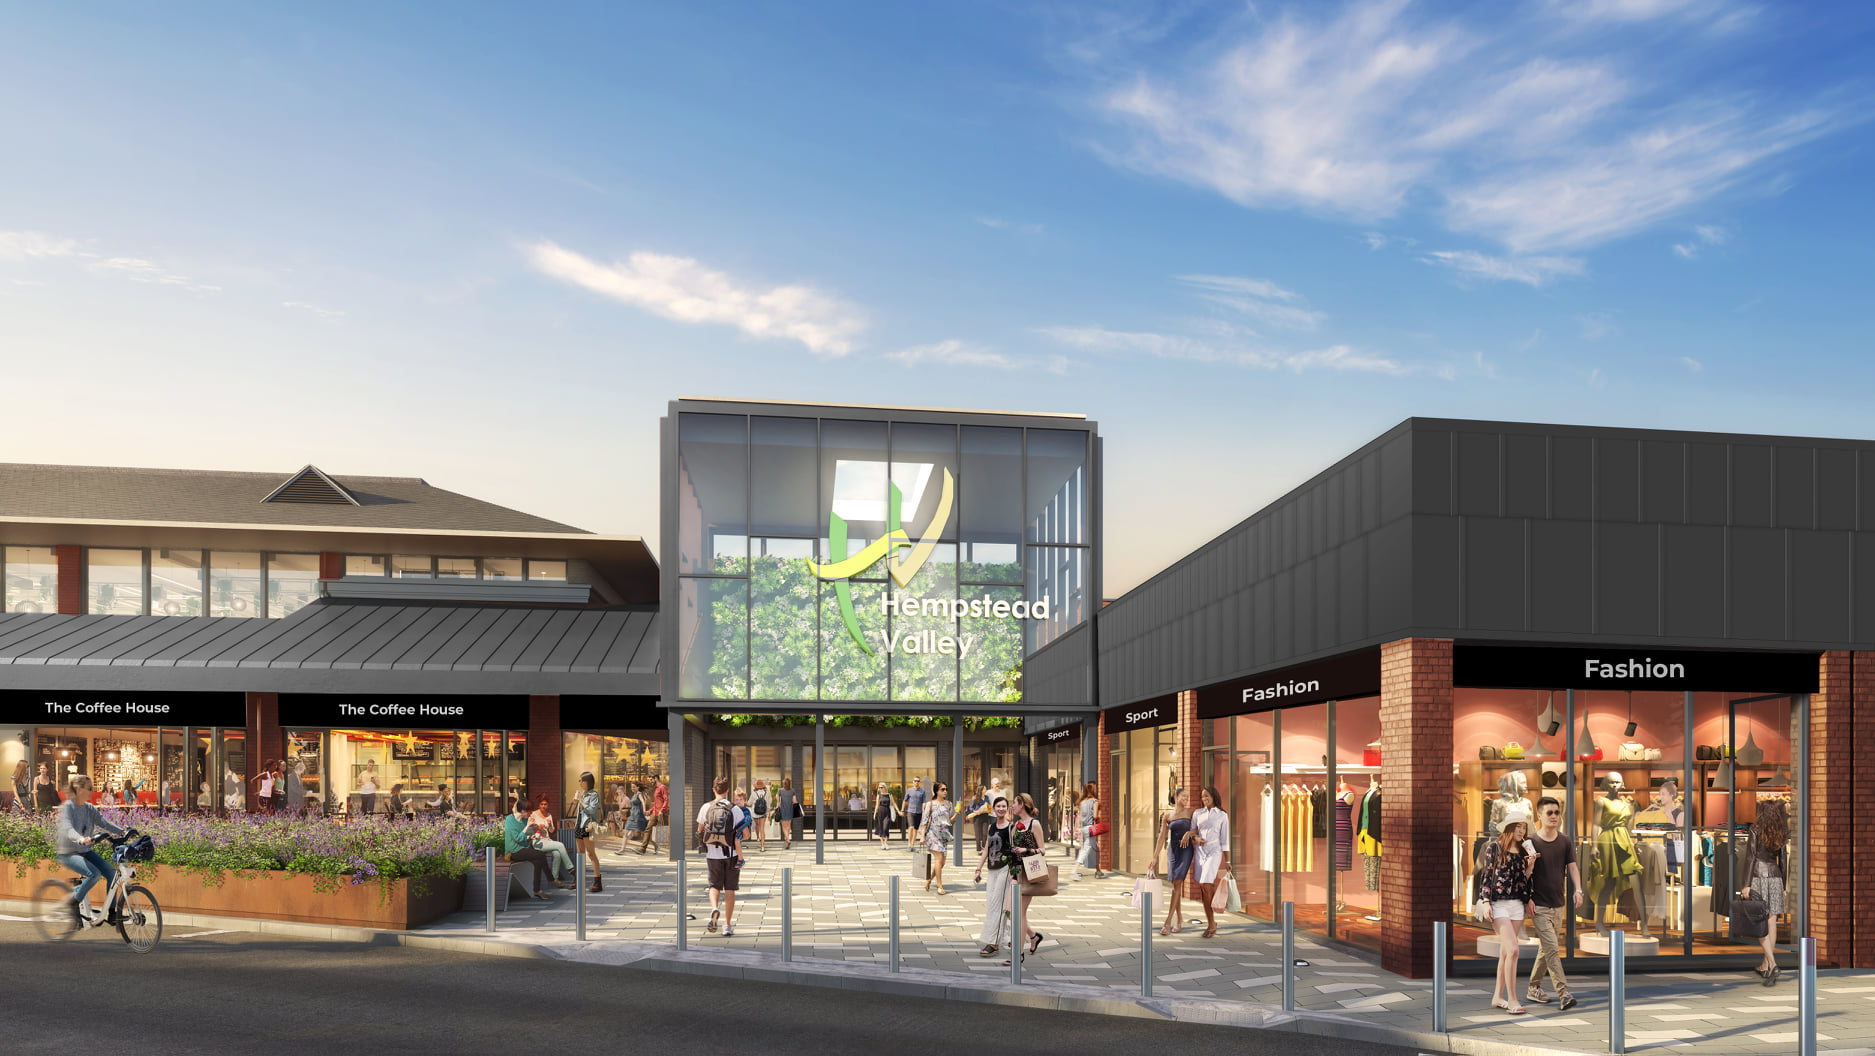 We are pleased to confirm that construction on a new development programme starts today at Hempstead Valley Shopping Centre